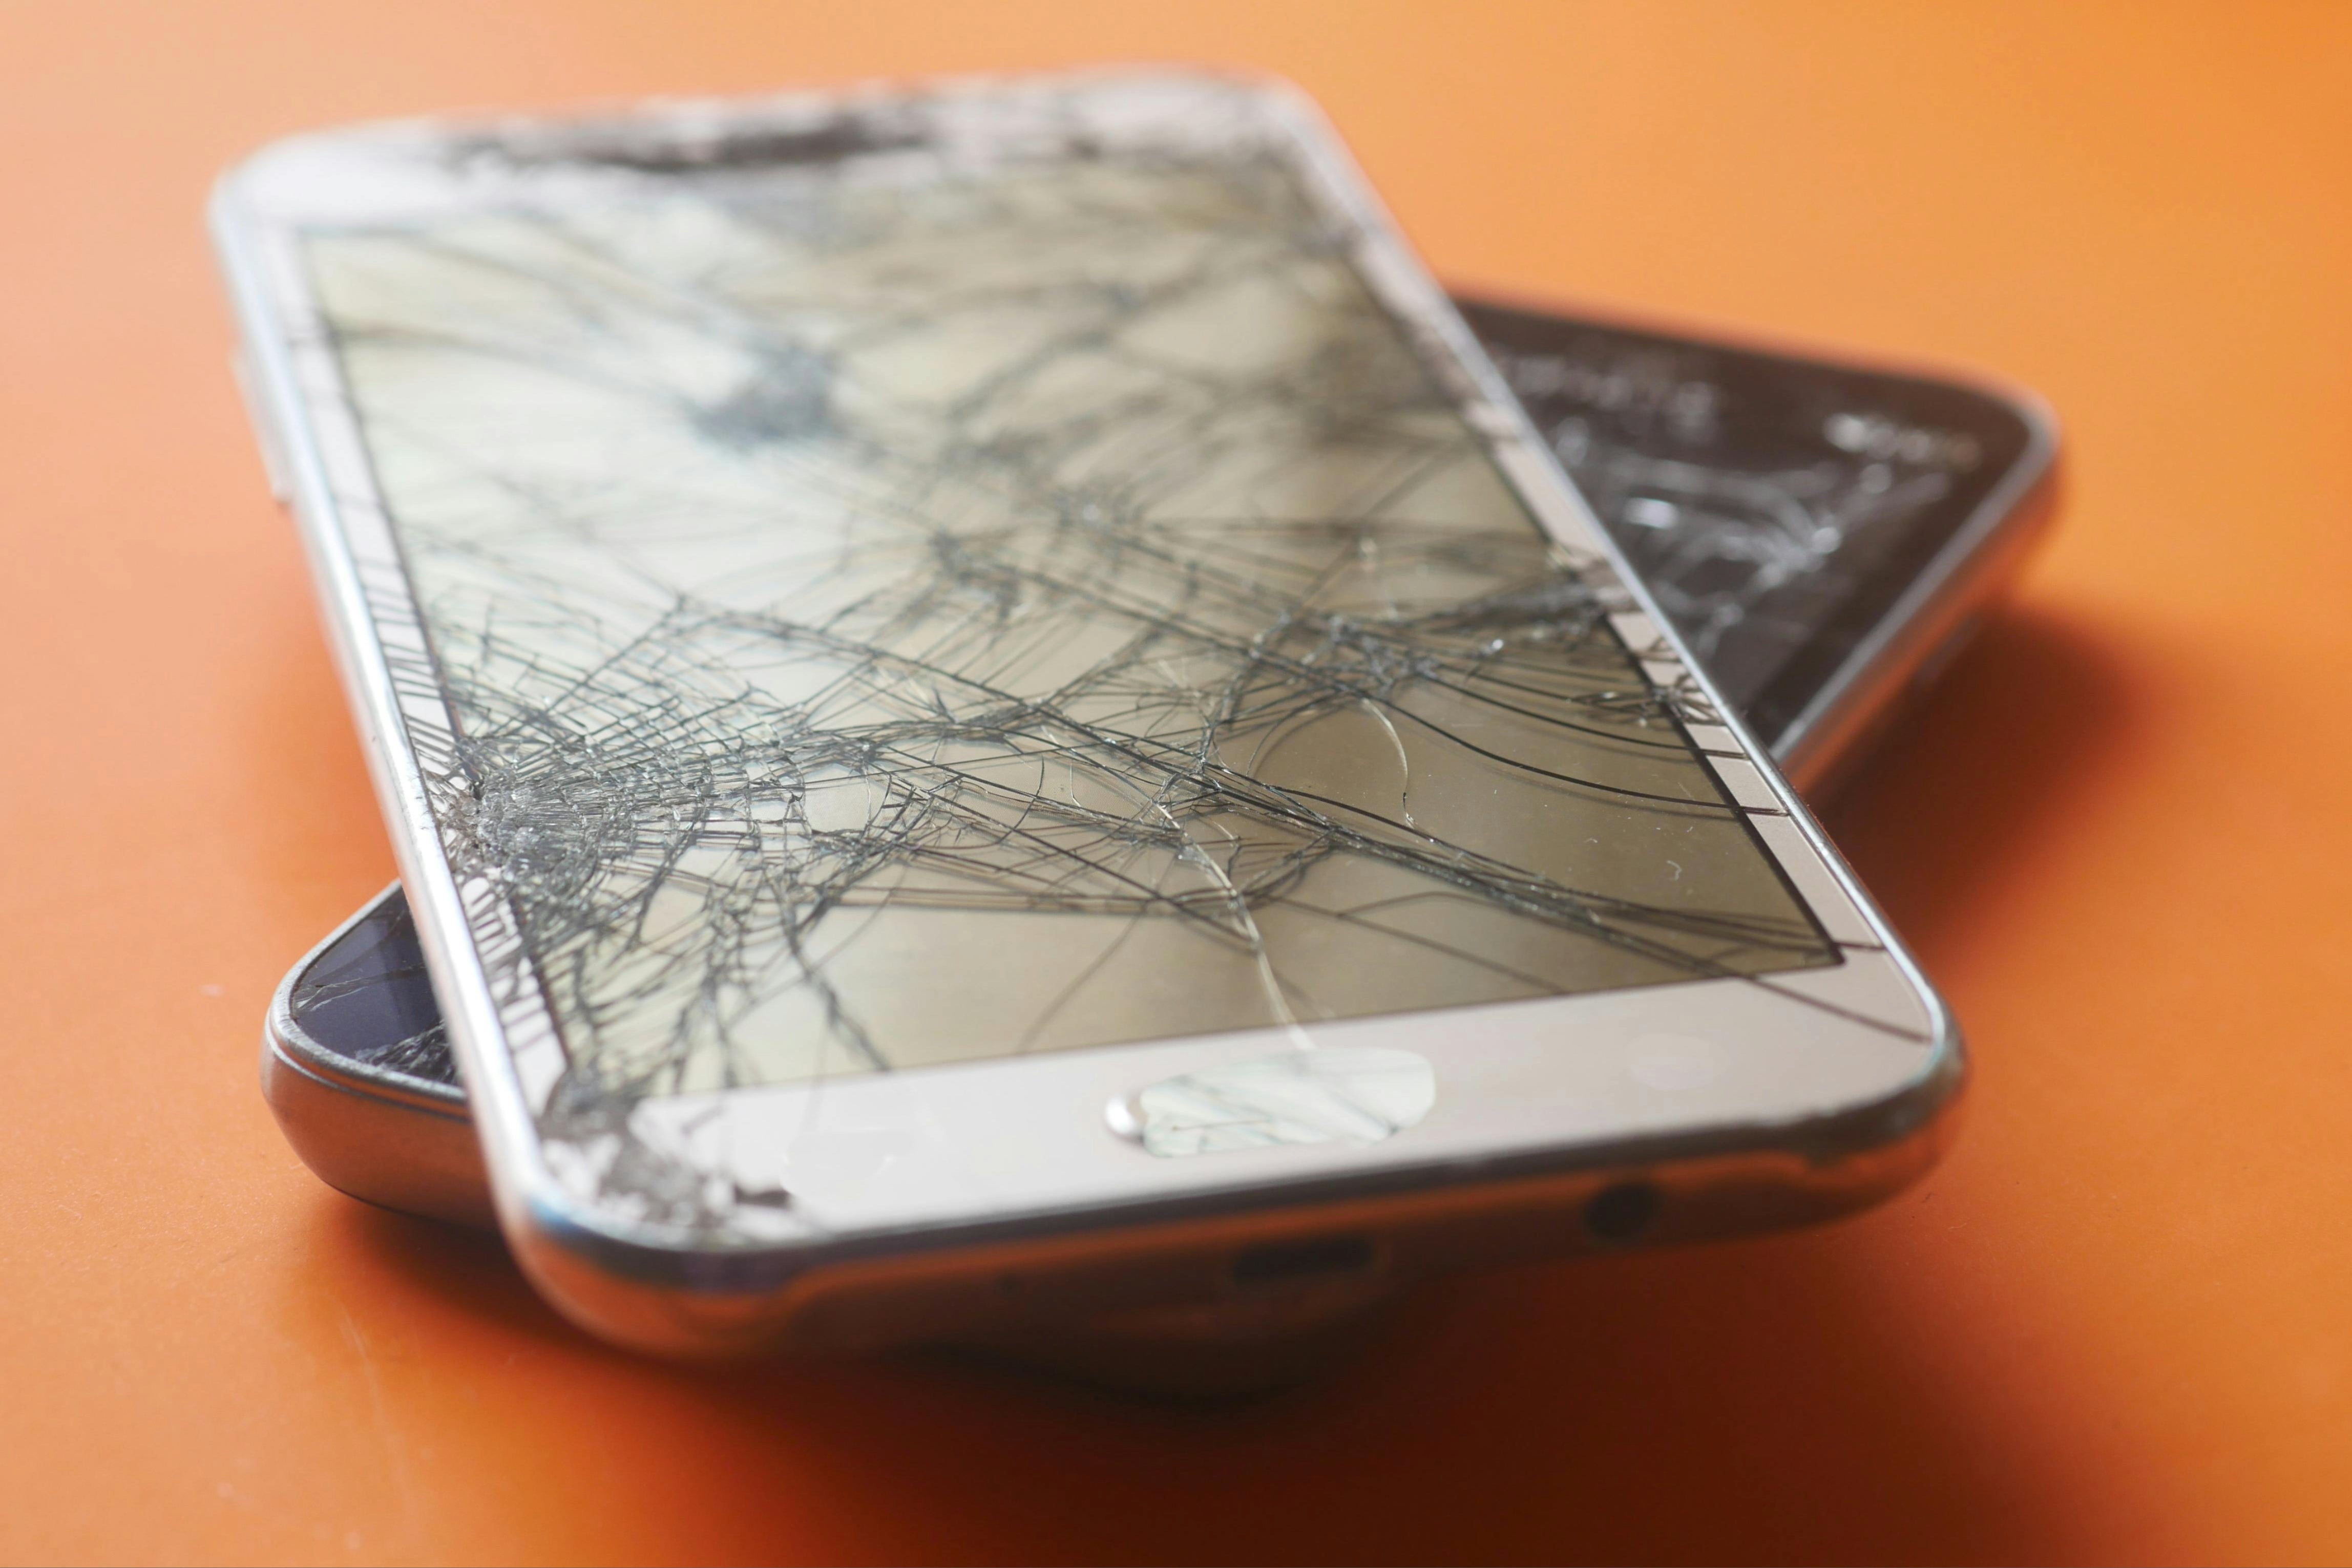 Can your phone survive you? 8 classic ways (plus some dumb ones) to damage your phone